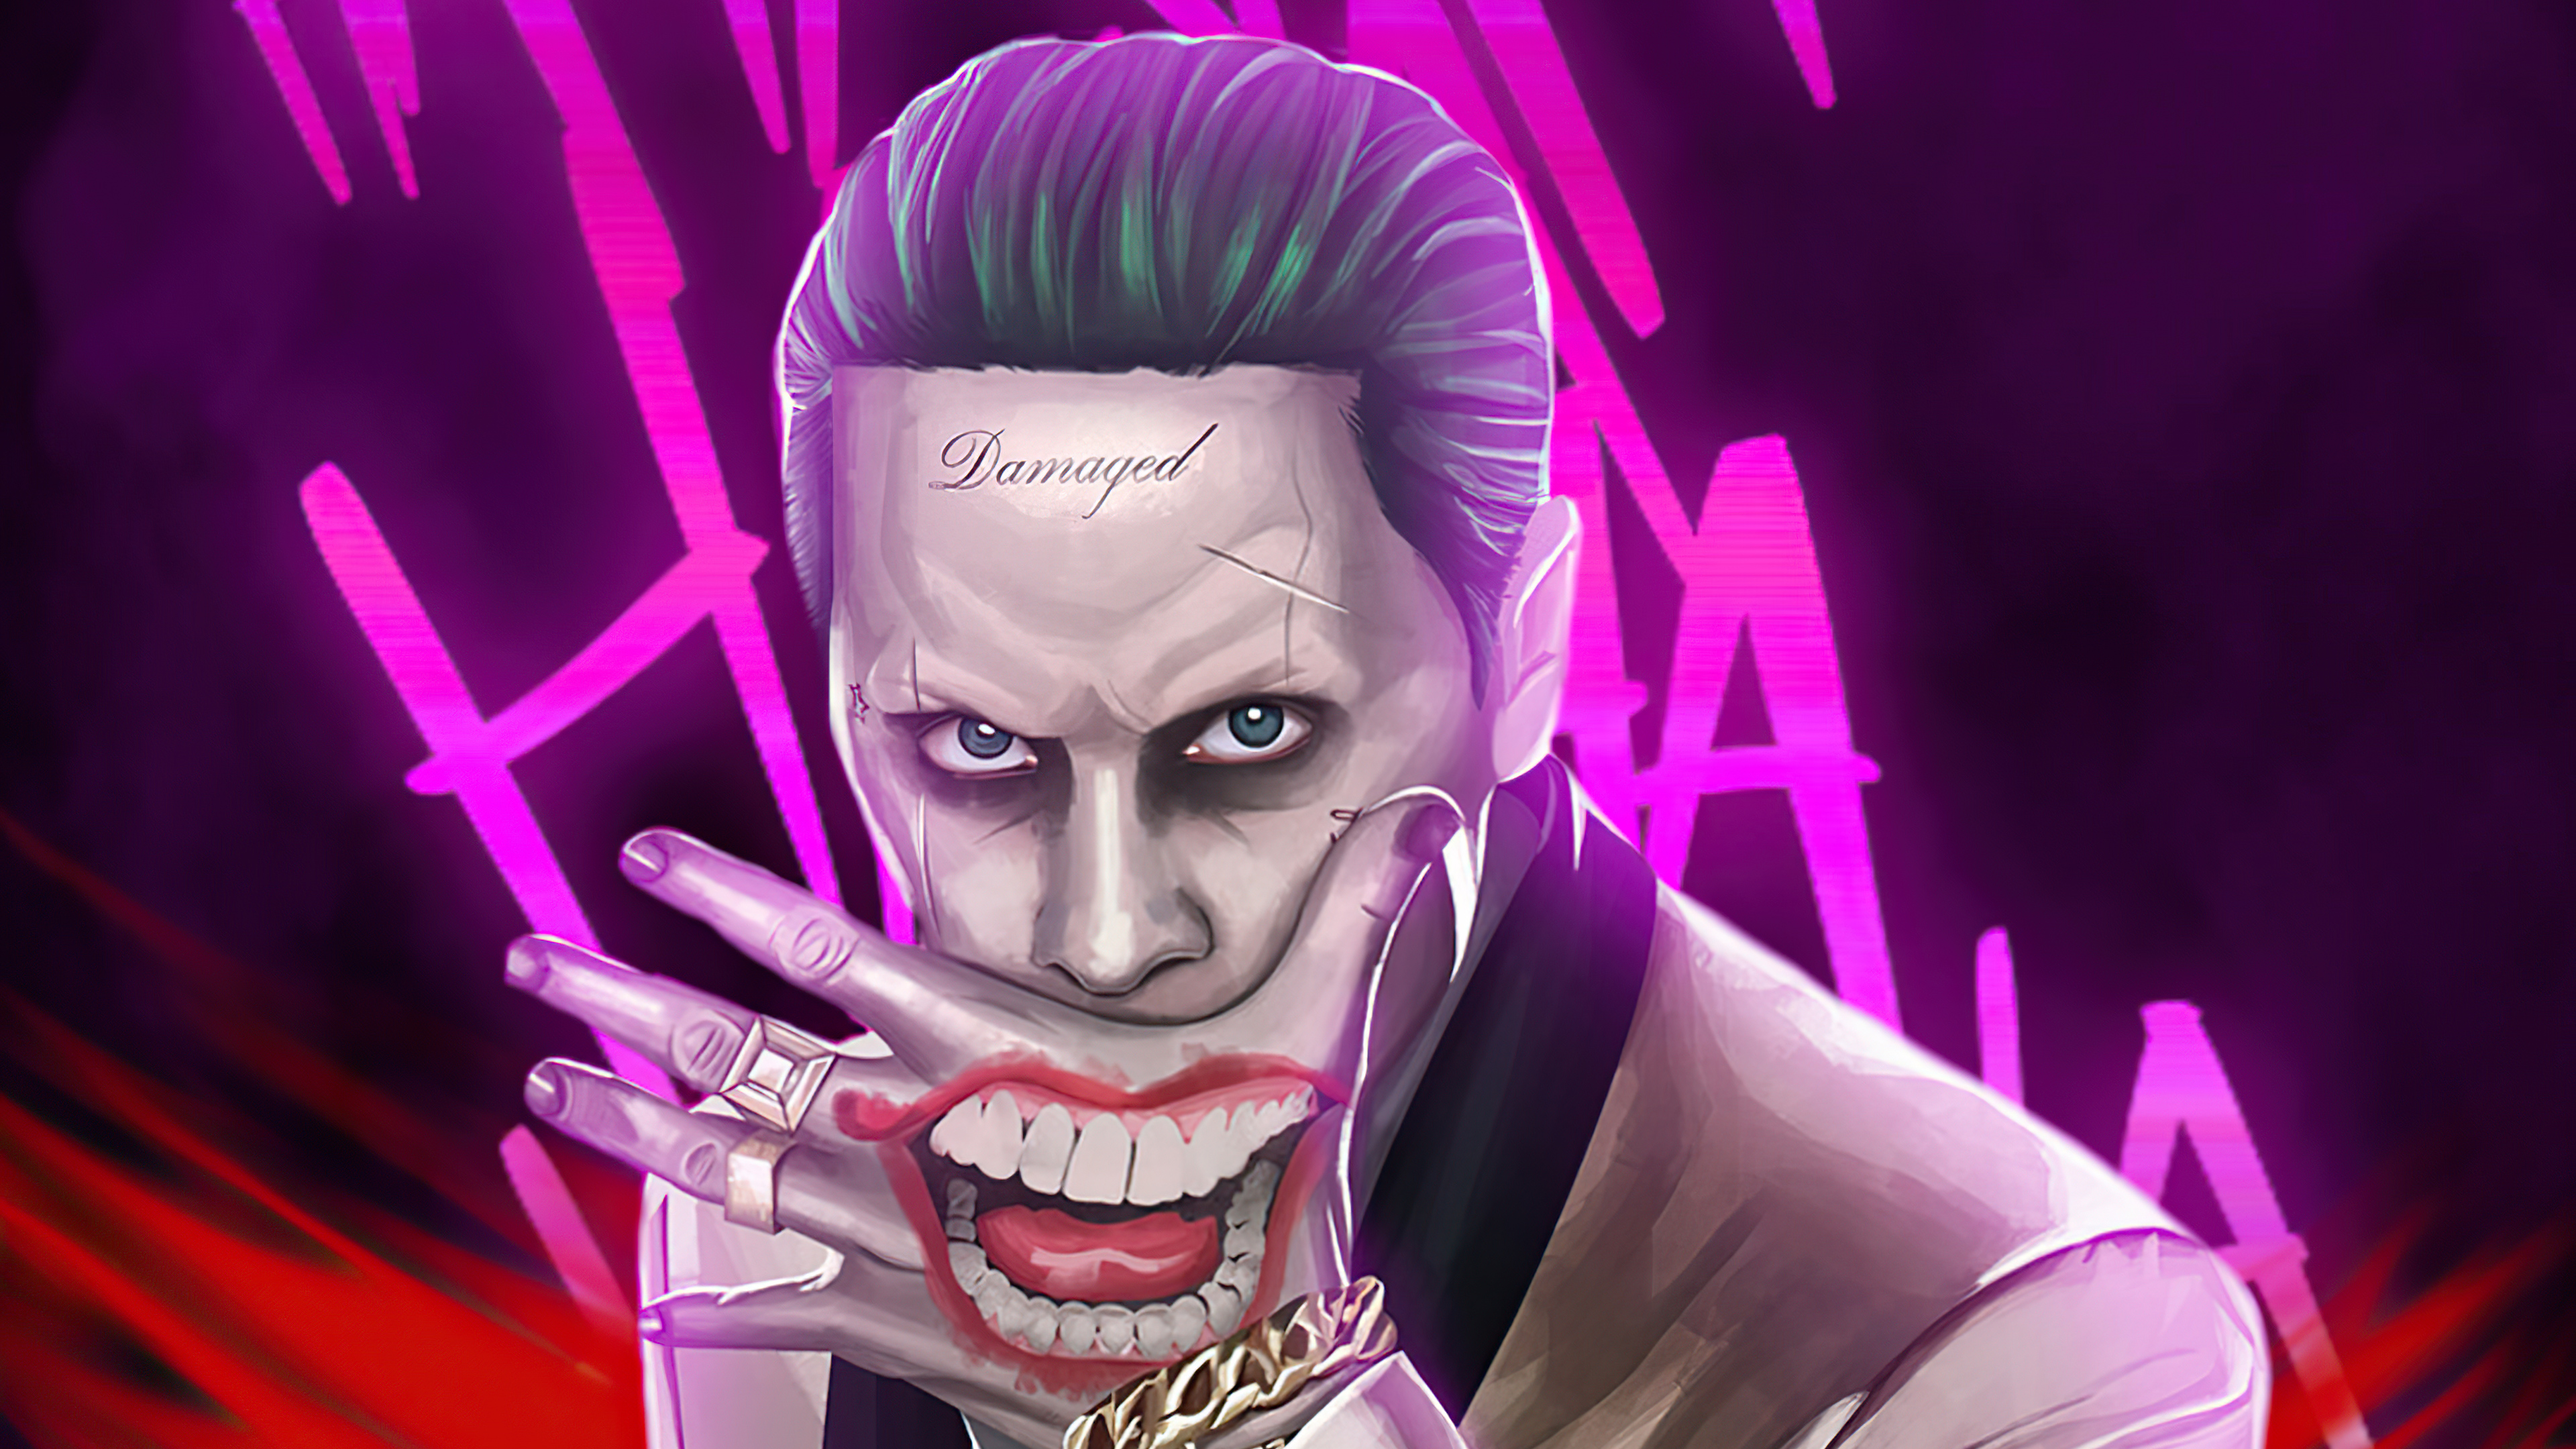 Awesome Joker Wallpapers